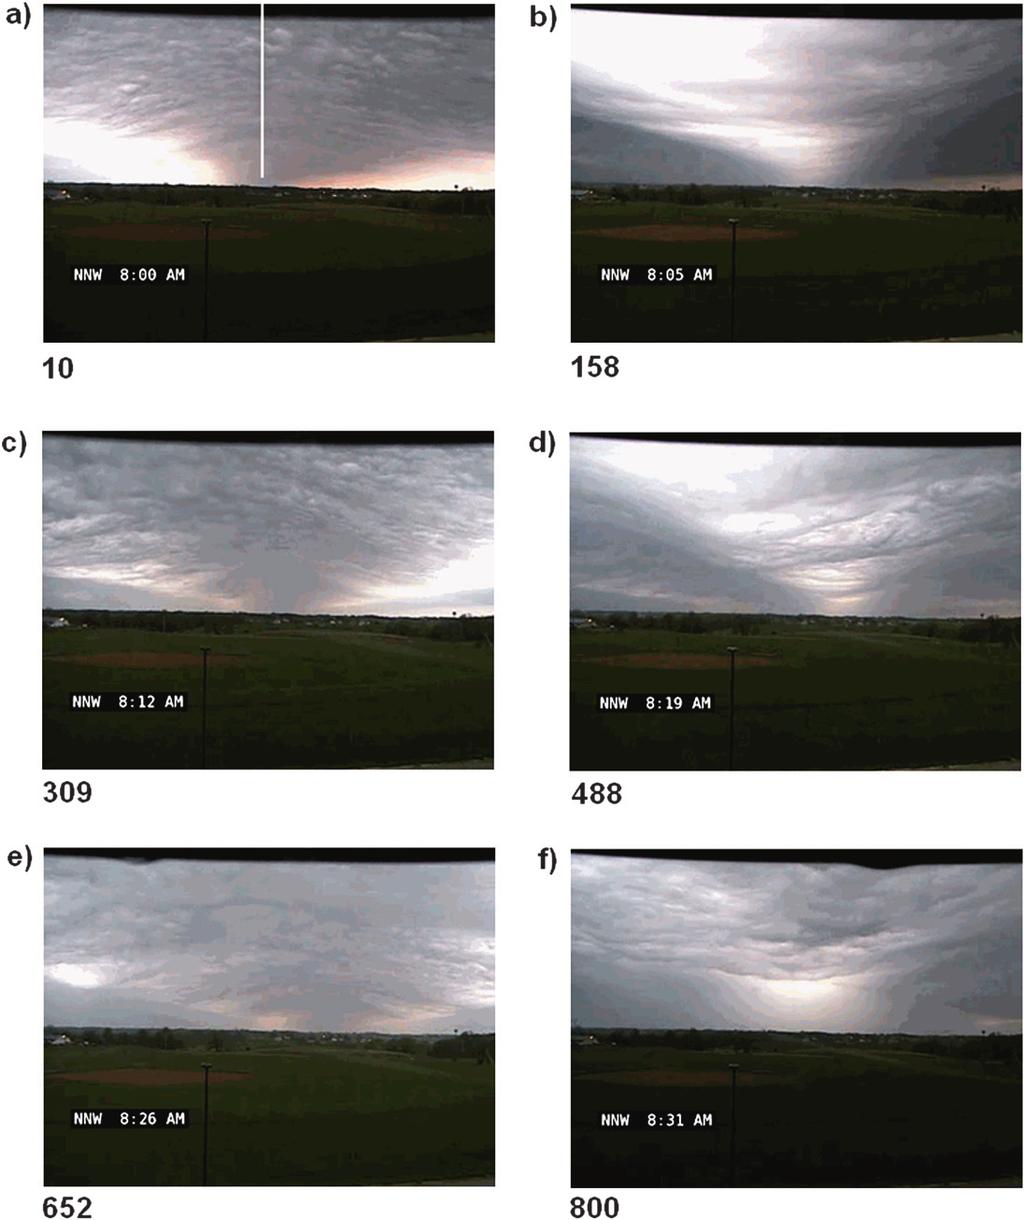 AUGUST 2010 C O L E M A N E T A L. 1359 FIG. 5. Still image frames (with frame numbers to bottom left of each) extracted from time-lapse video of bore and gravity waves from Tama Webcam.